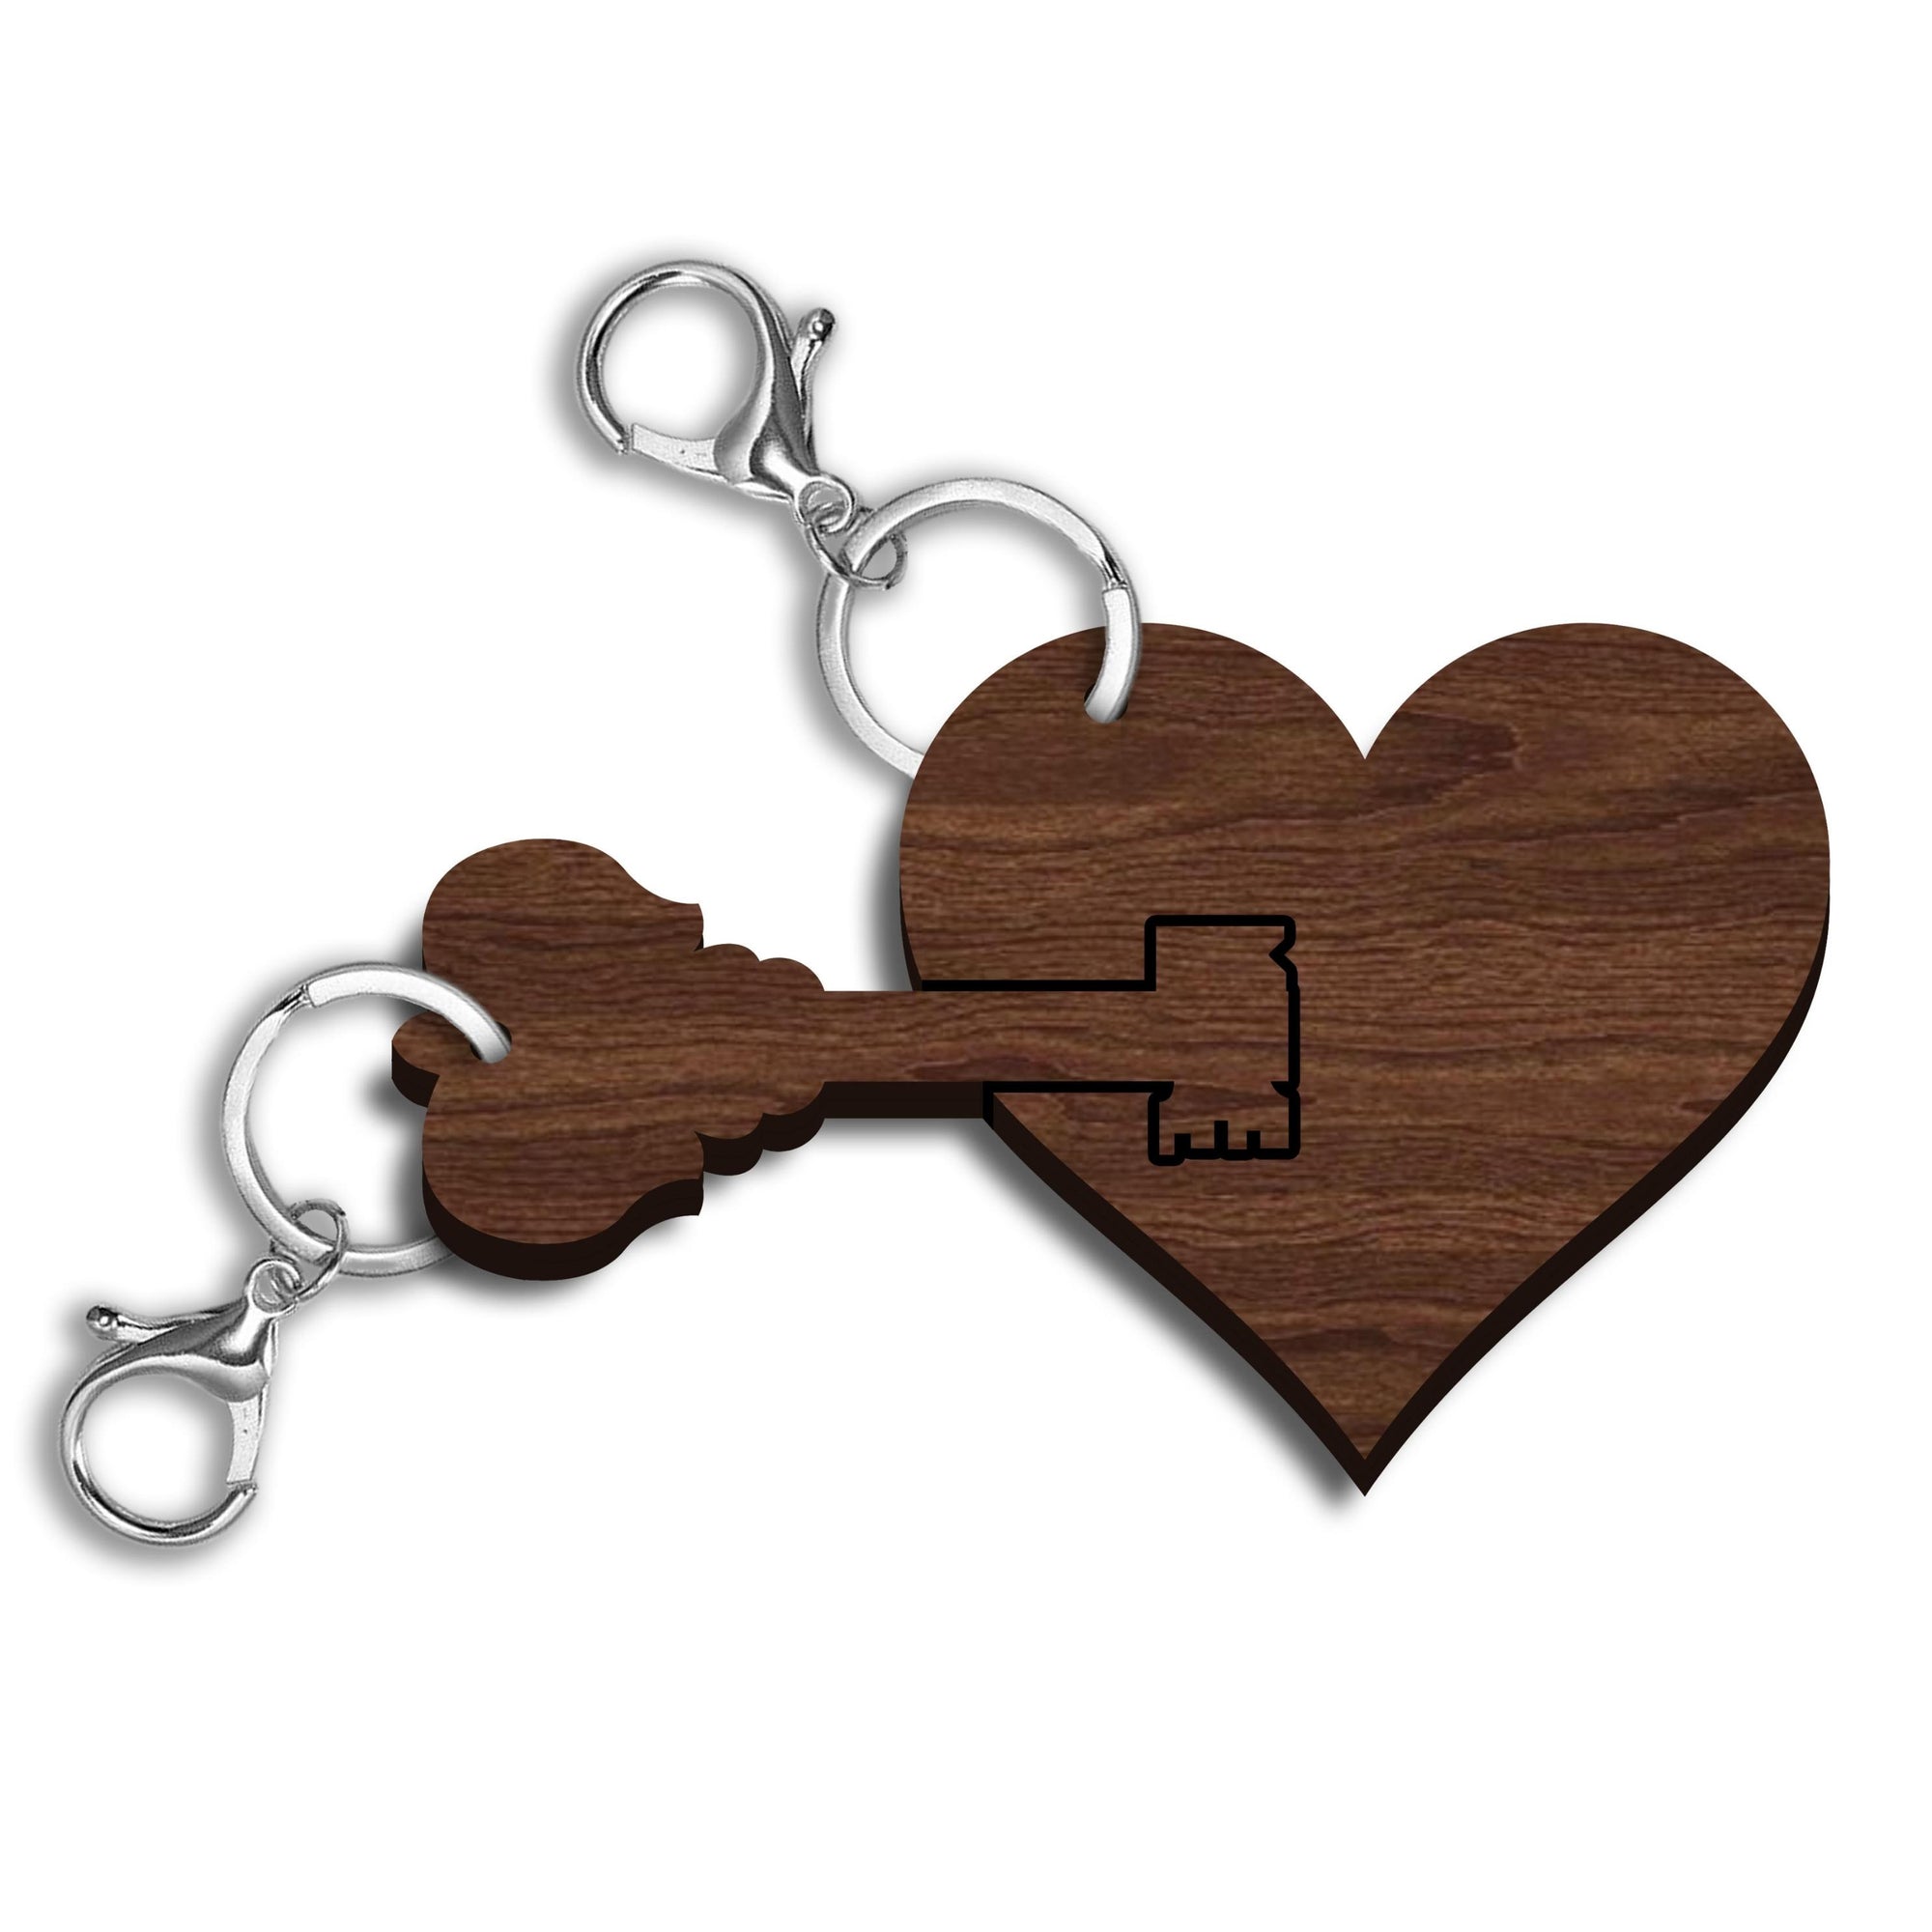 Personalised Couple 2pcs Heart Lock Wooden Keychain, Custom Valentine&#39;s Wood Key Chain, Engraved Key Ring Bag Name Tags, Drive Safe Keyrings Anniversary, Bridesmaid Gift, Wedding Favours